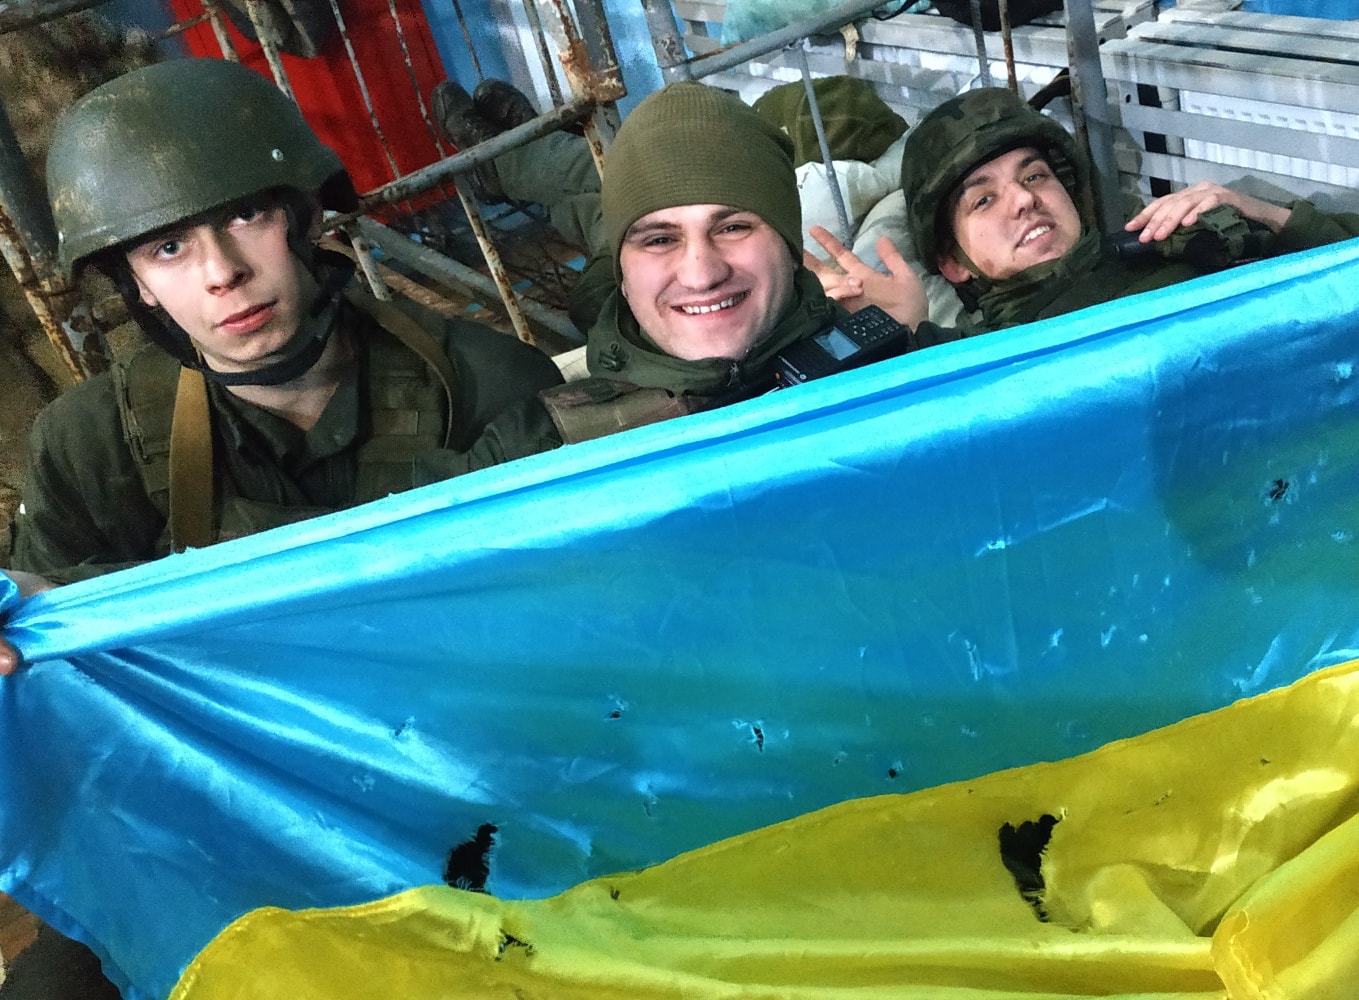 Defense Express/ Soldiers with the Ukrainian 4th Rapid Reaction Brigade pose with a Ukrainian flag after retaking the Hostomel Airport northwest of Kyiv, preventing a larger airborne assault